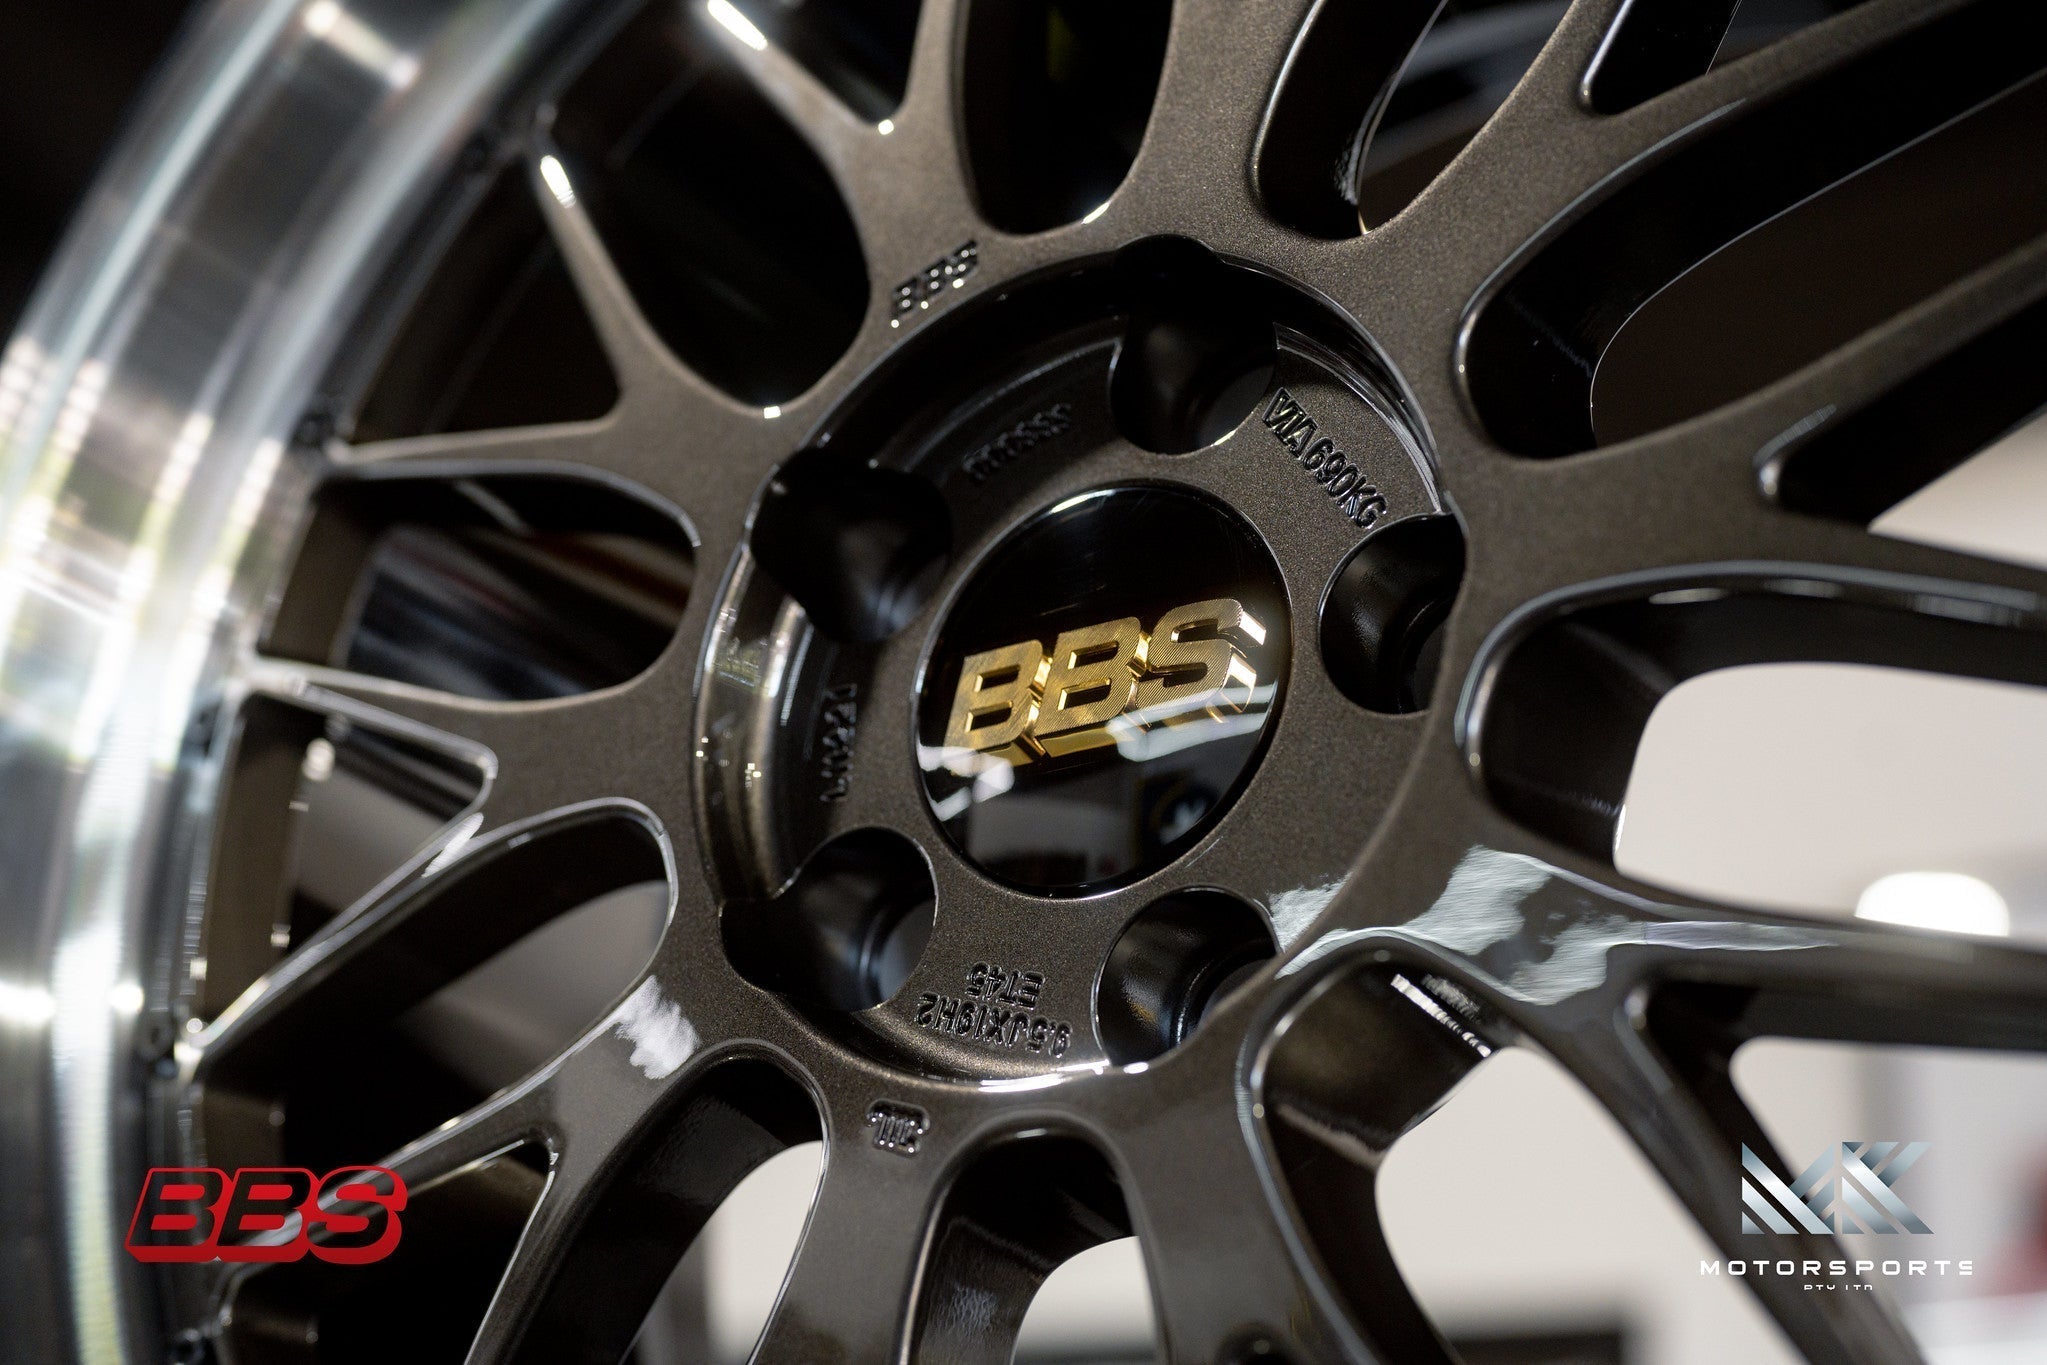 BBS LM Selenite Brown Special Edition - Premium Wheels from BBS Japan - From just $4850.00! Shop now at MK MOTORSPORTS